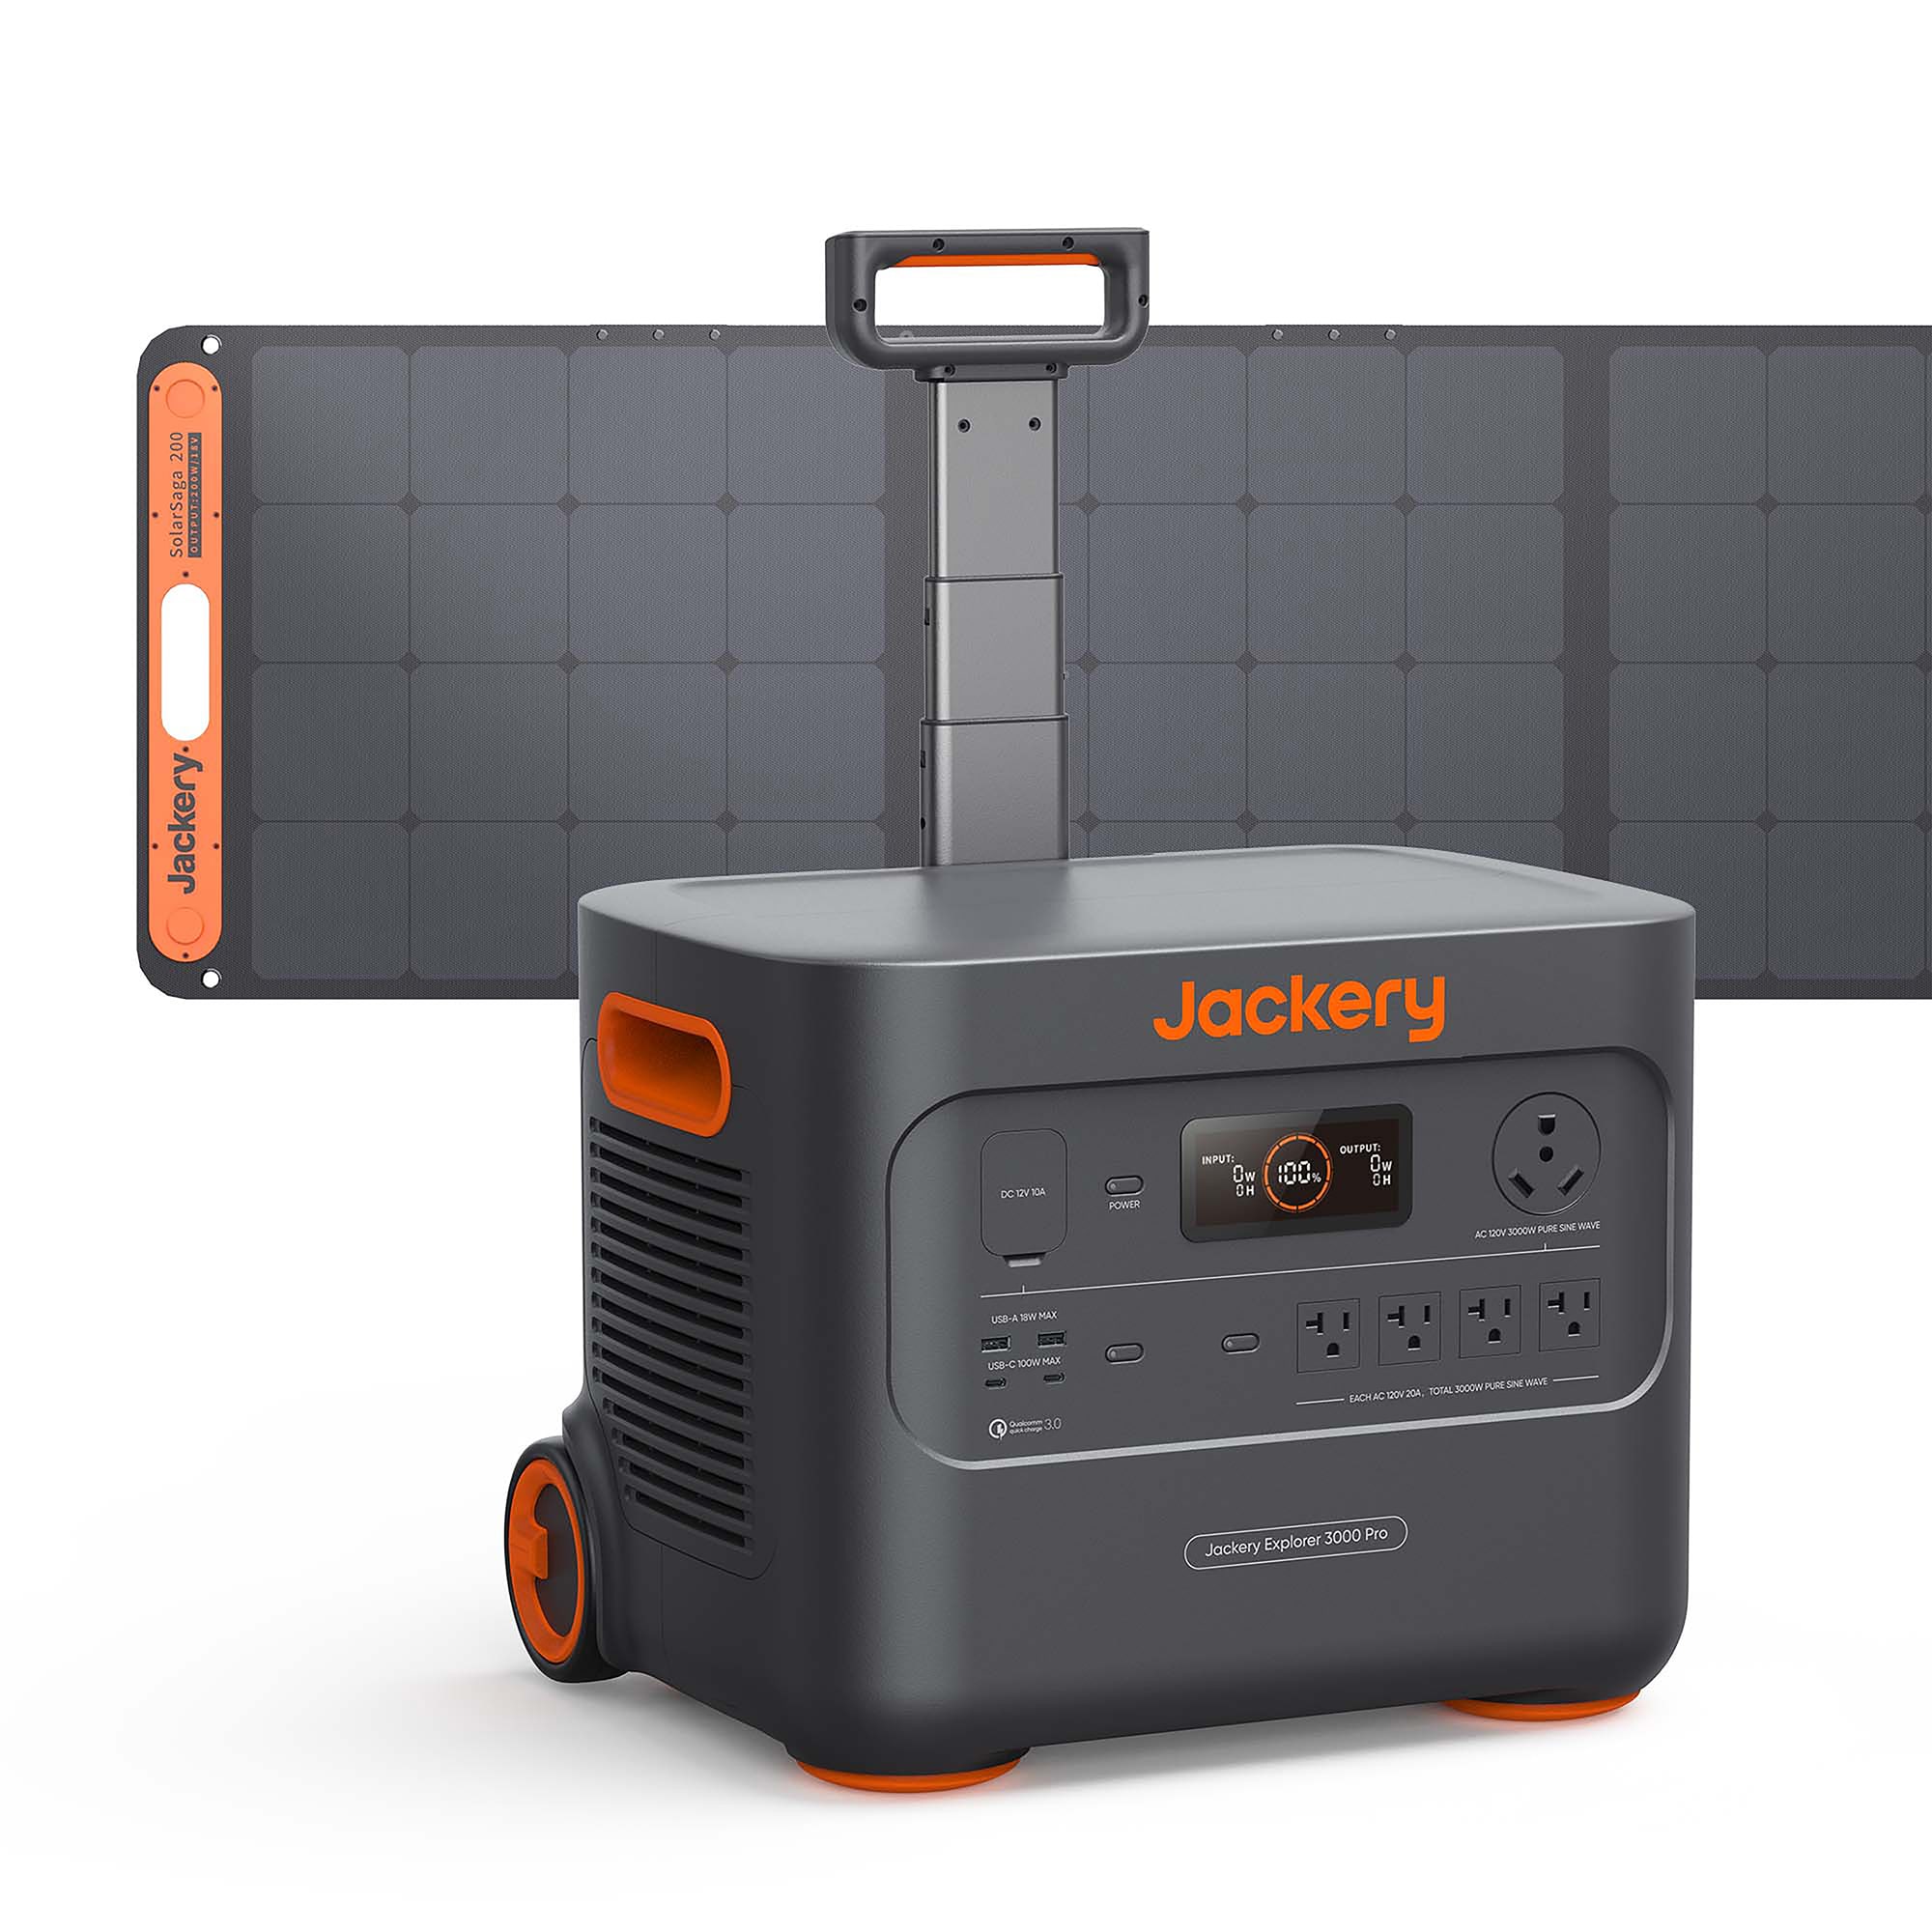 Can a Solar Generator Power a Coffee Maker?